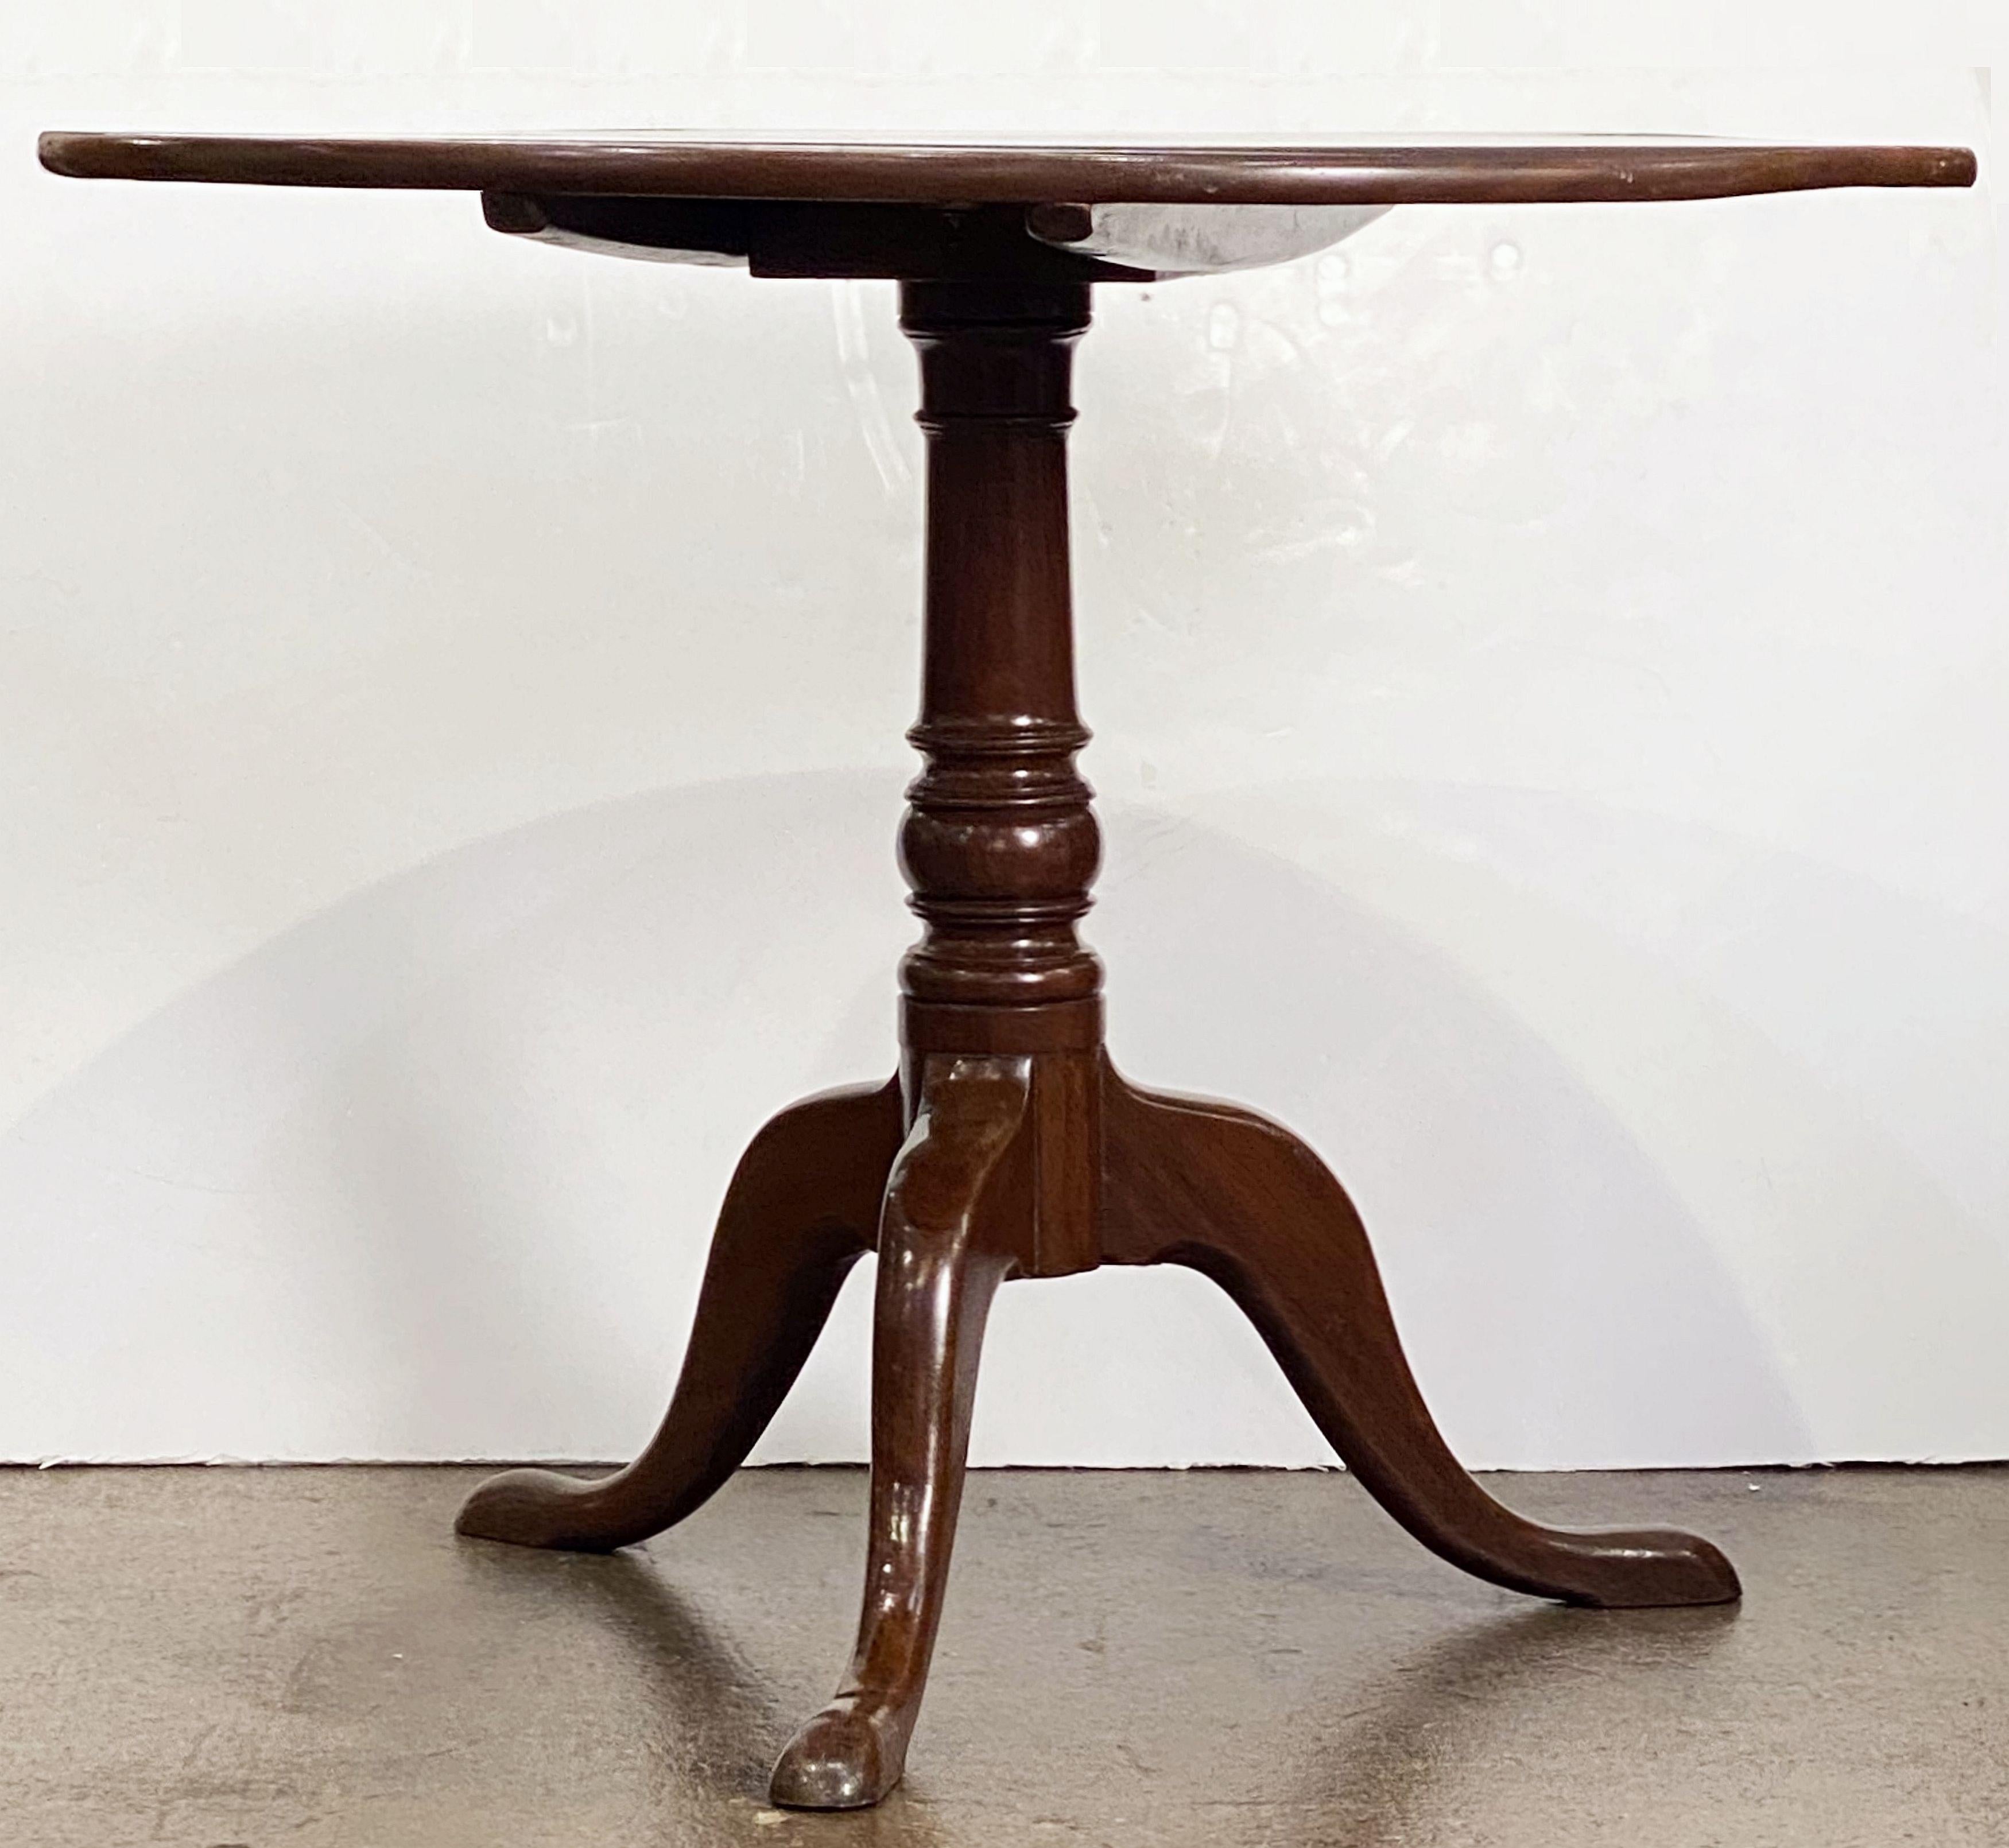 An English tilt-top table of mahogany featuring a round top mounted to a turned column pedestal with tripod base and pad-foot legs. 
With original brass hardware.

Great for use as a breakfast or sofa table.